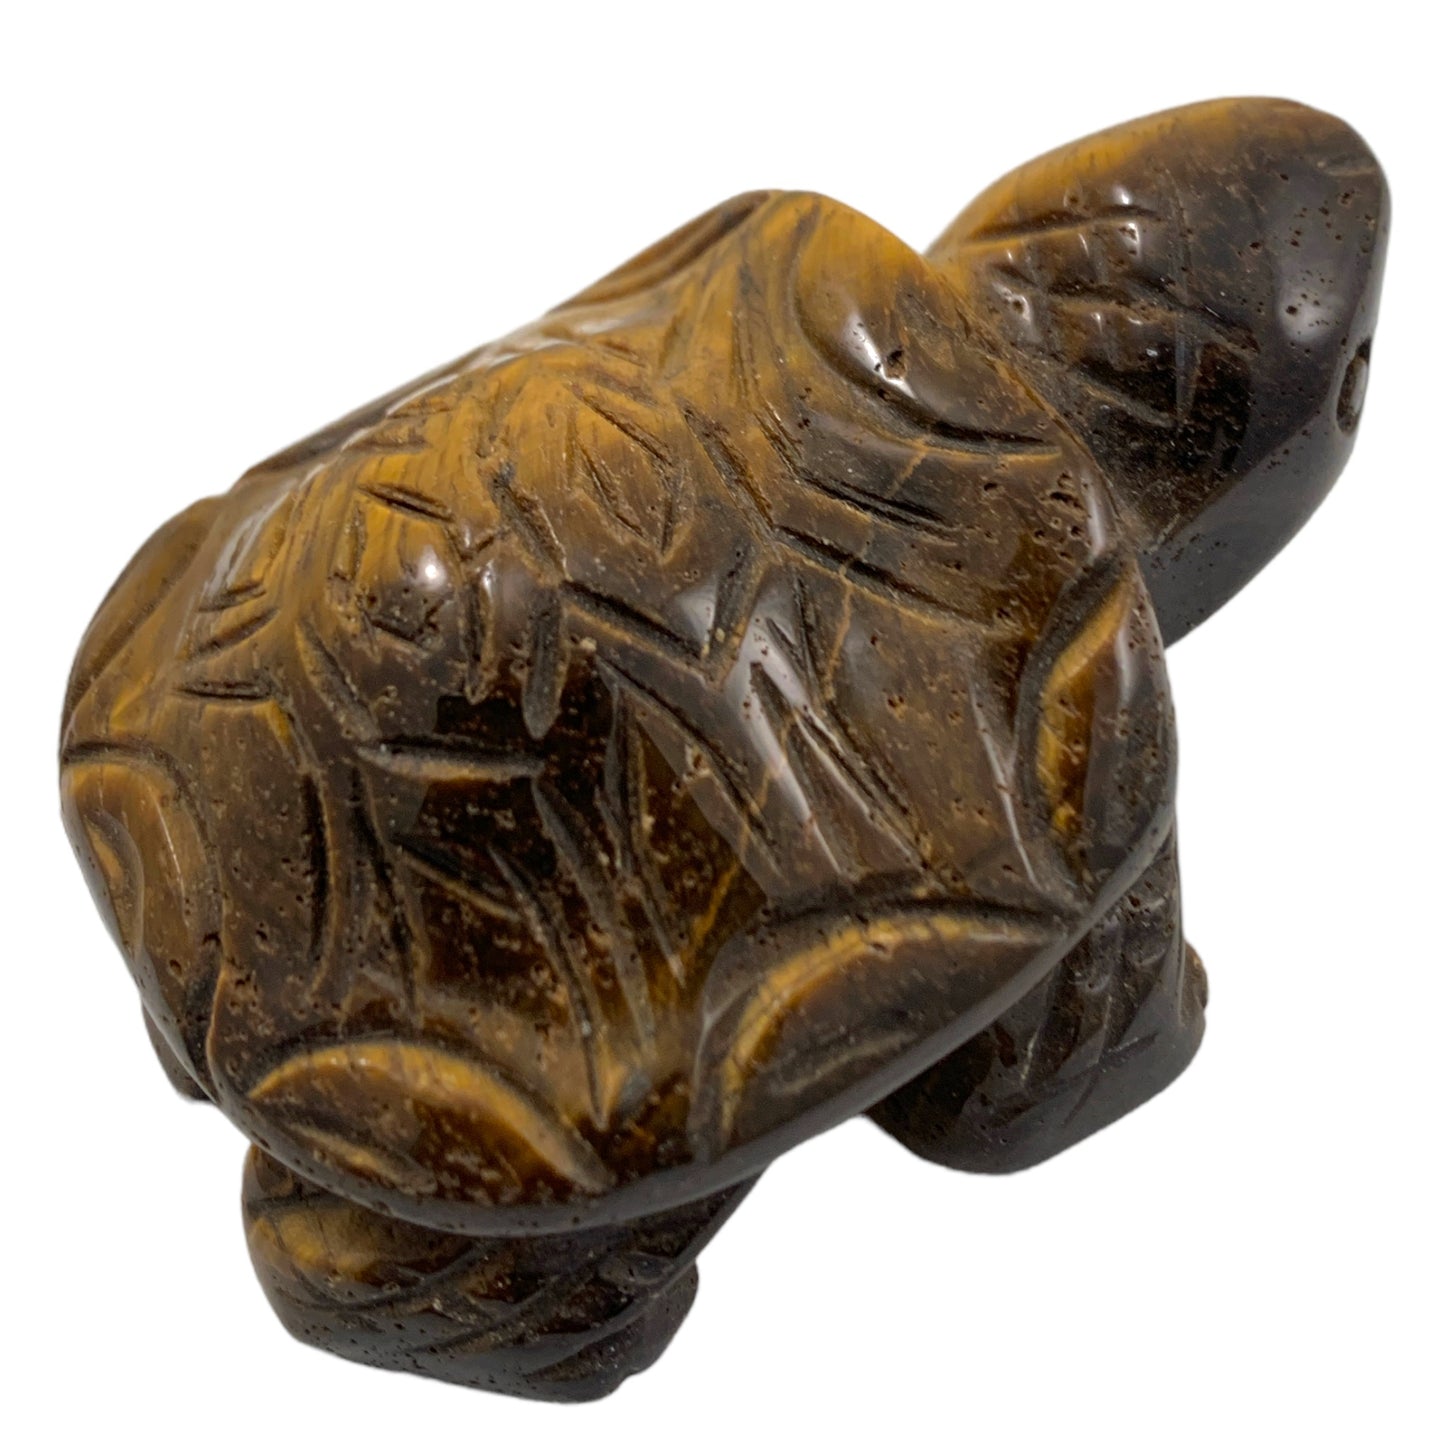 Small Tortoise - Tigers Eye - Hand Carved - NEW622